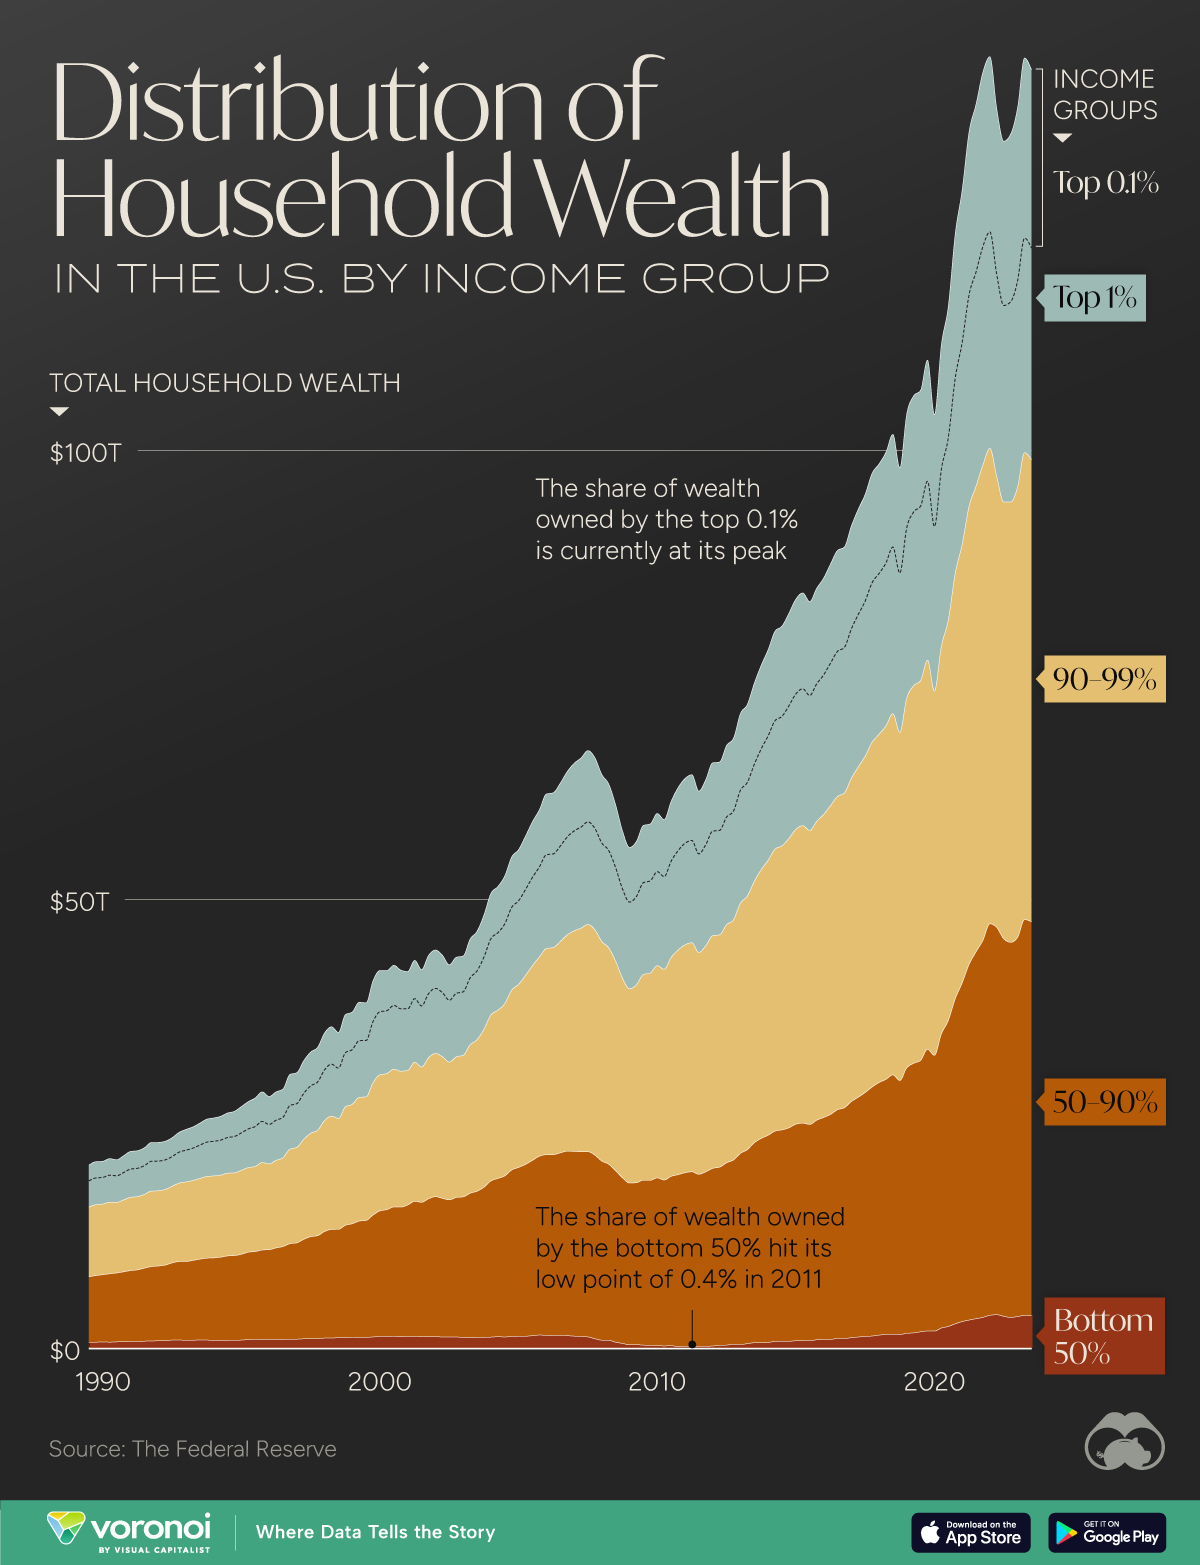 This chart shows the distribution of household wealth in America